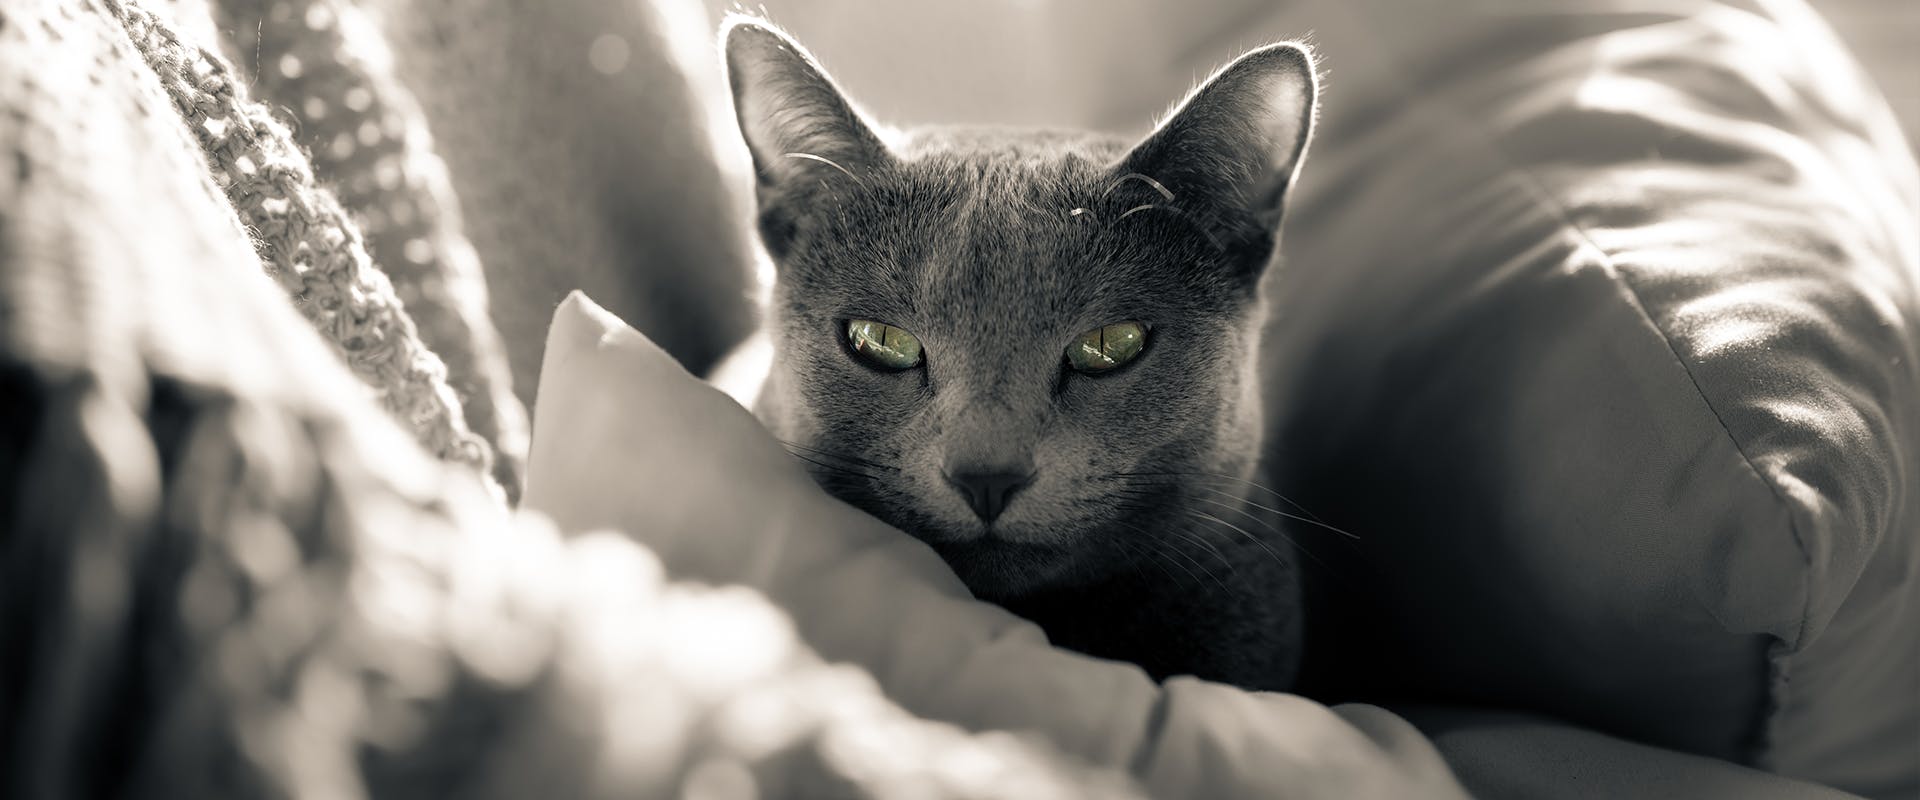 A Russian Blue cat sitting in a pile of blankets and cushions